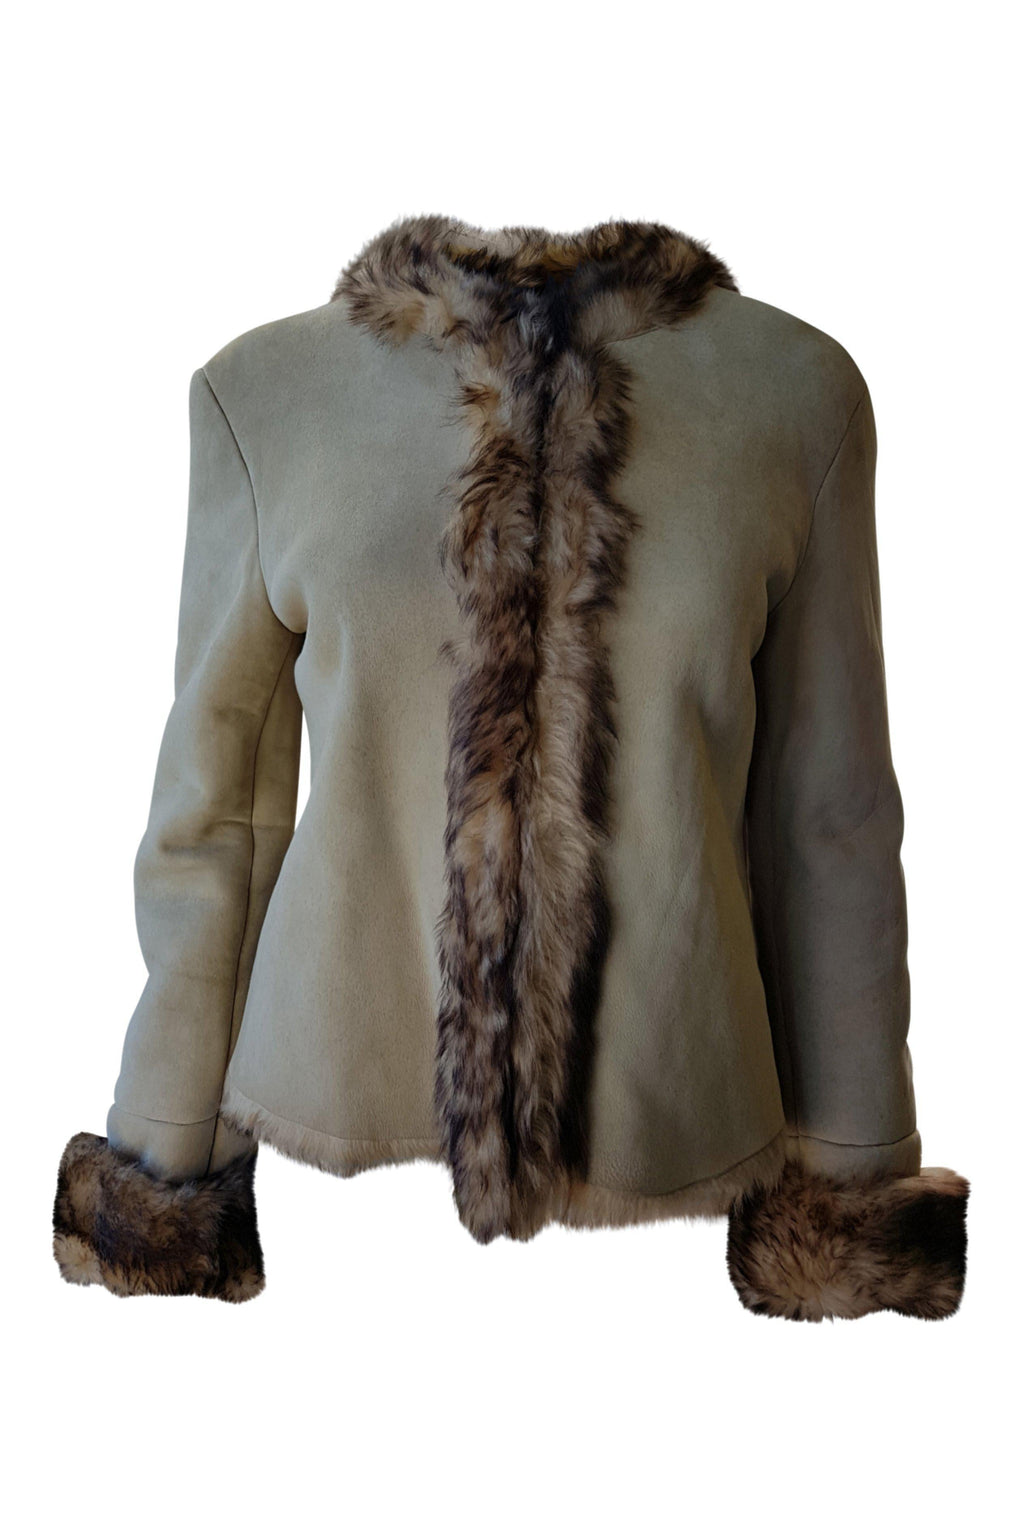 RUFFO RESEARCH Vintage Fall 2000 Fur Lined Suede Coat (S)-Ruffo Research-The Freperie